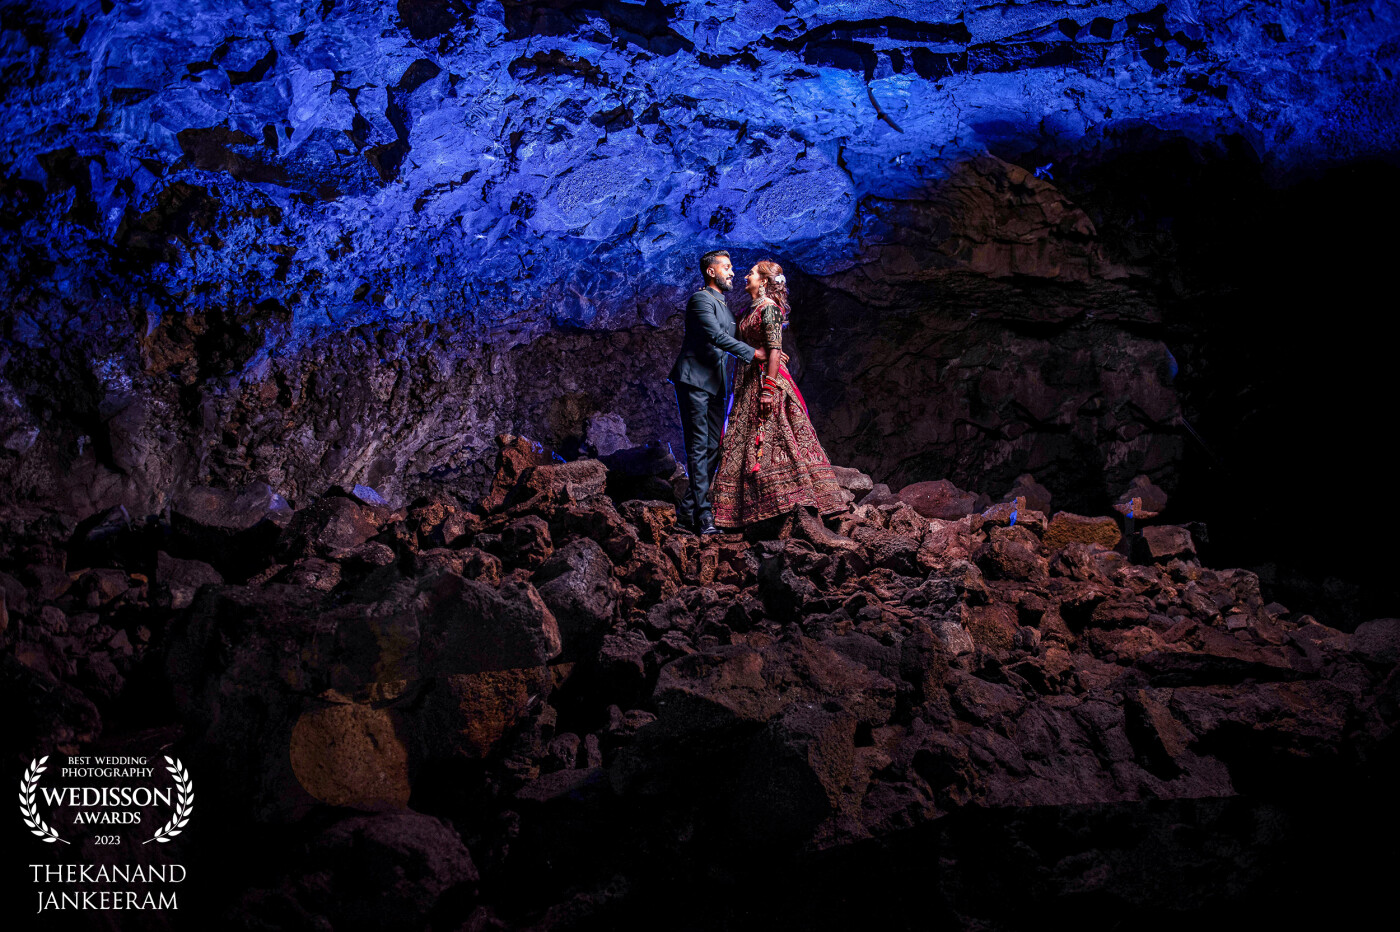 Unexplored caves in Mauritius was first spotted by our team. We planned to bring couple there but was not being able to. This daring couple made it there and it was epic for both of us